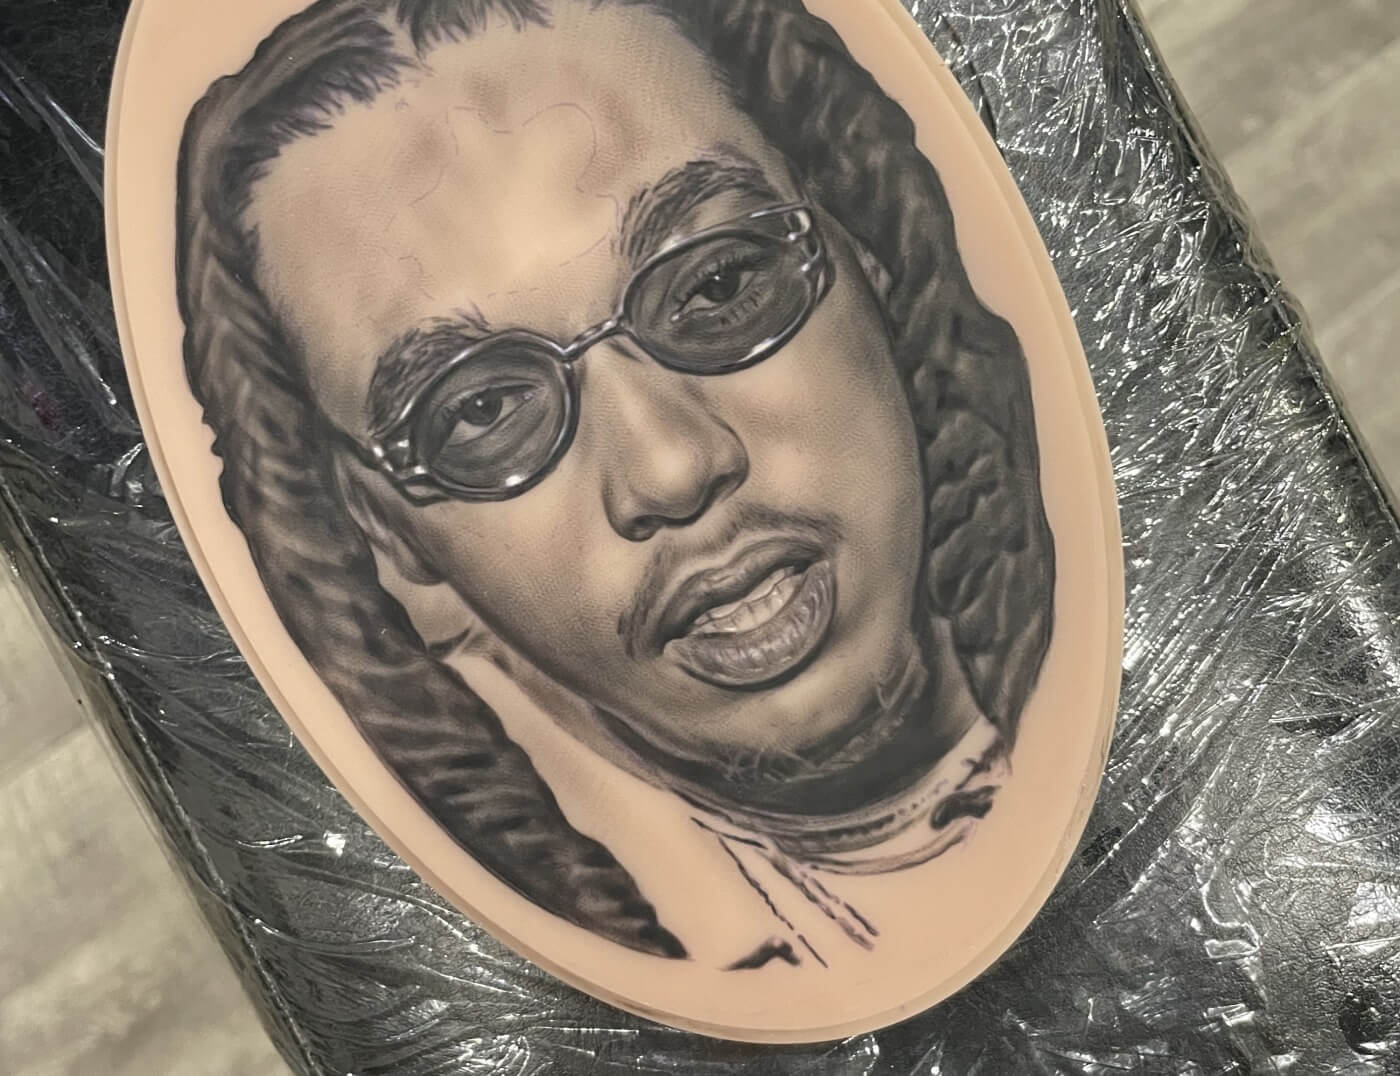 Take Off Photo Realism Portrait by T Sawyer at Iron Palm Tattoos & Body Piercing in downtown Atlanta, GA. The artwork is so good that Google images could match the likeness with the real person. Walk-Ins are accepted. Call 404-97307828 or stop by for a free consultation.